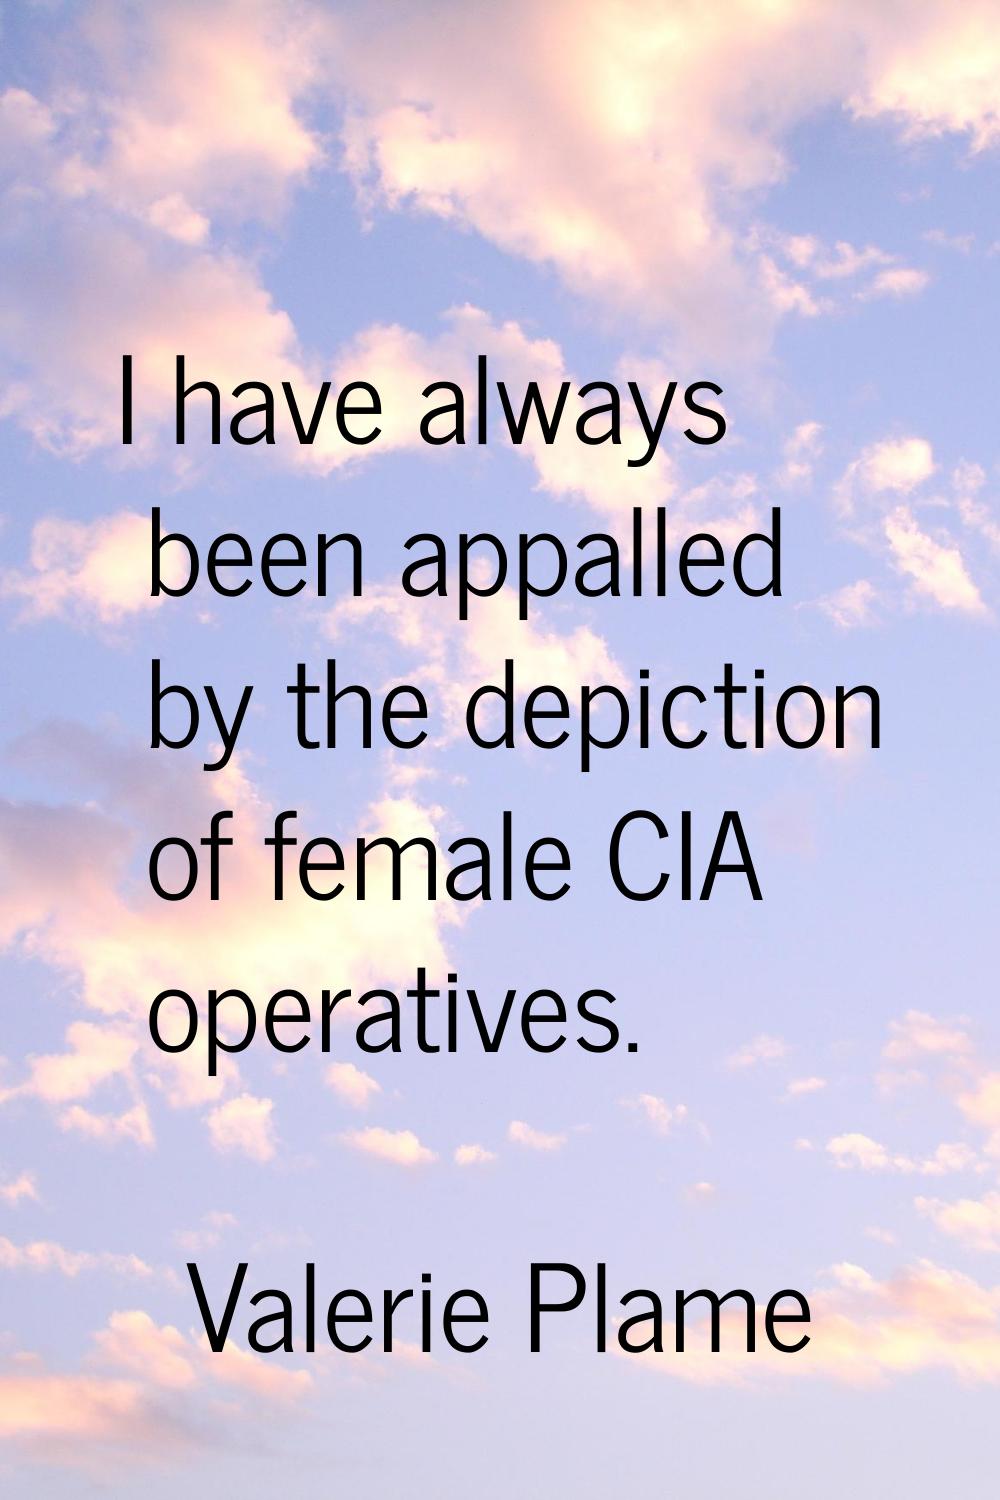 I have always been appalled by the depiction of female CIA operatives.